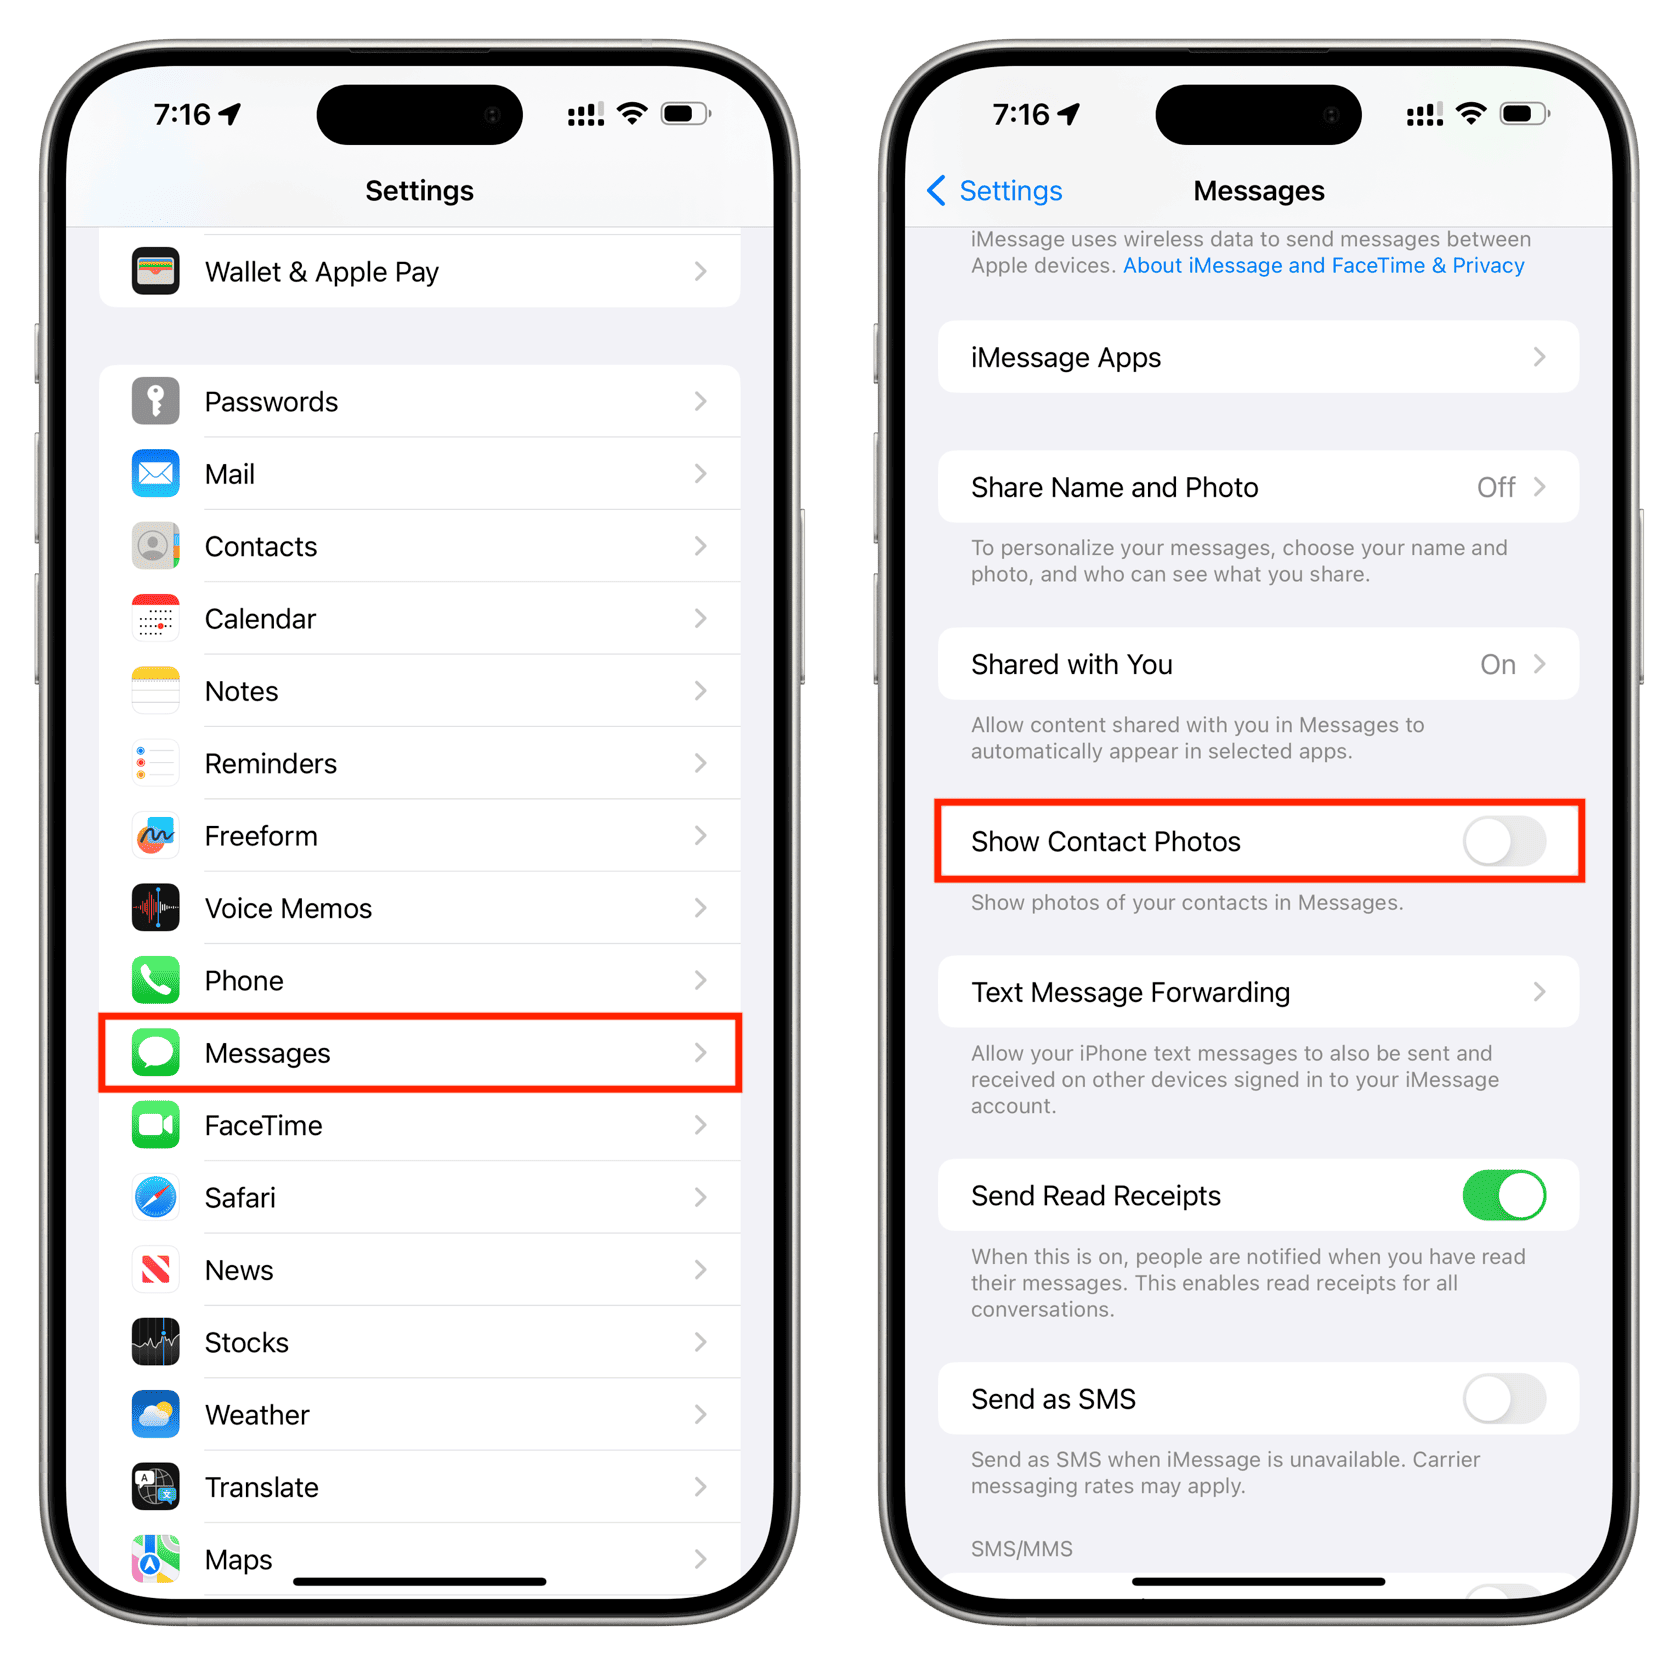 Turn off Show Contact Photos in Messages settings on iPhone